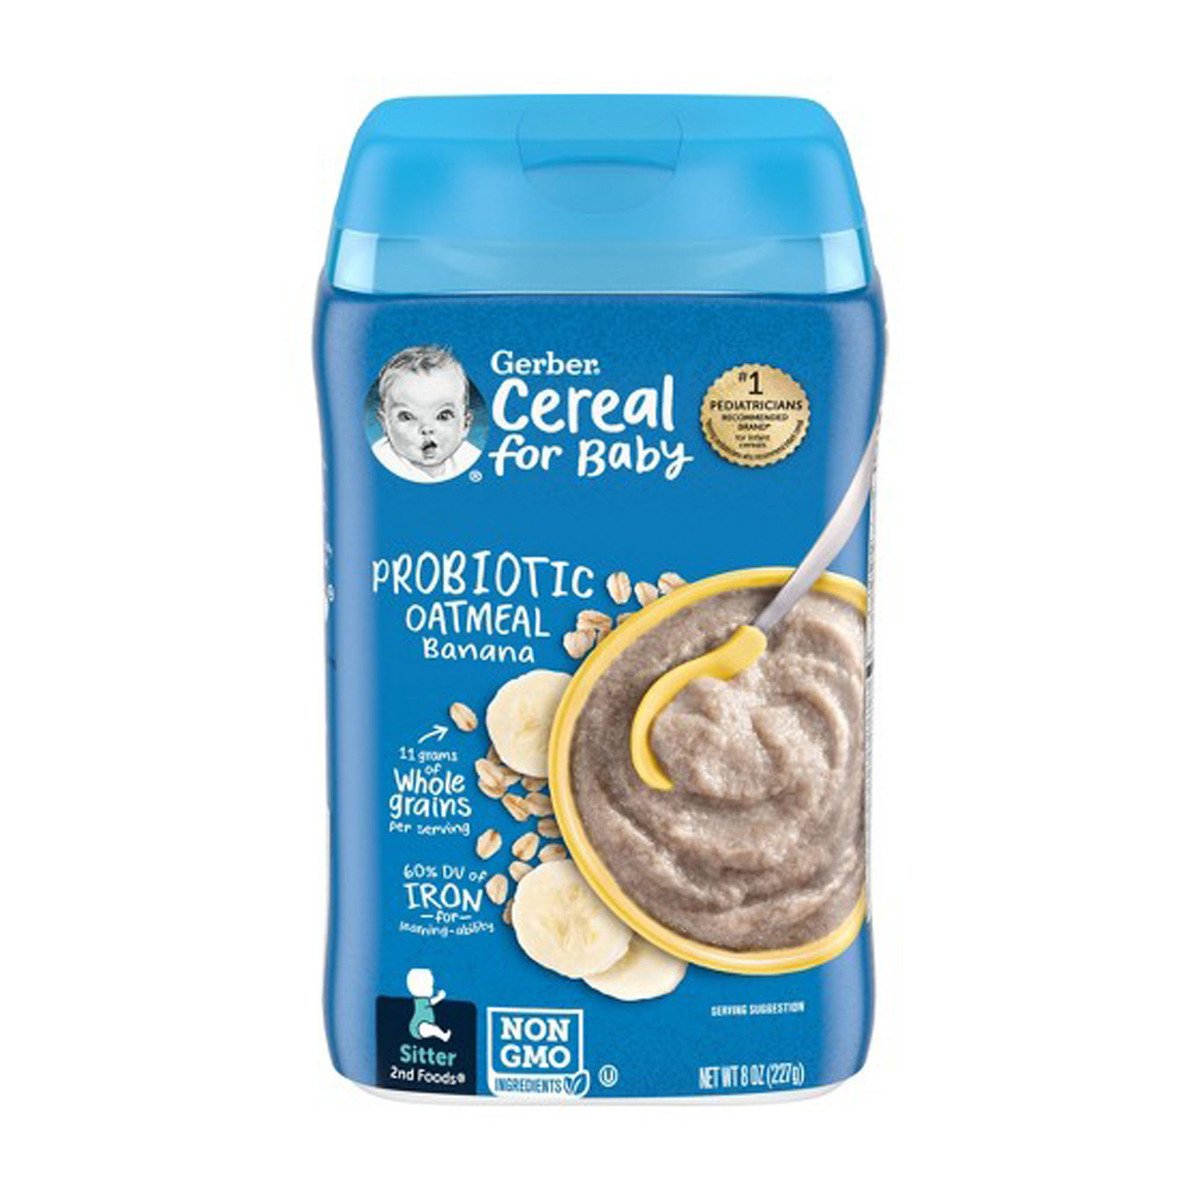 Gerber Probiotic Oatmeal Banana Cereal For Baby 227 g